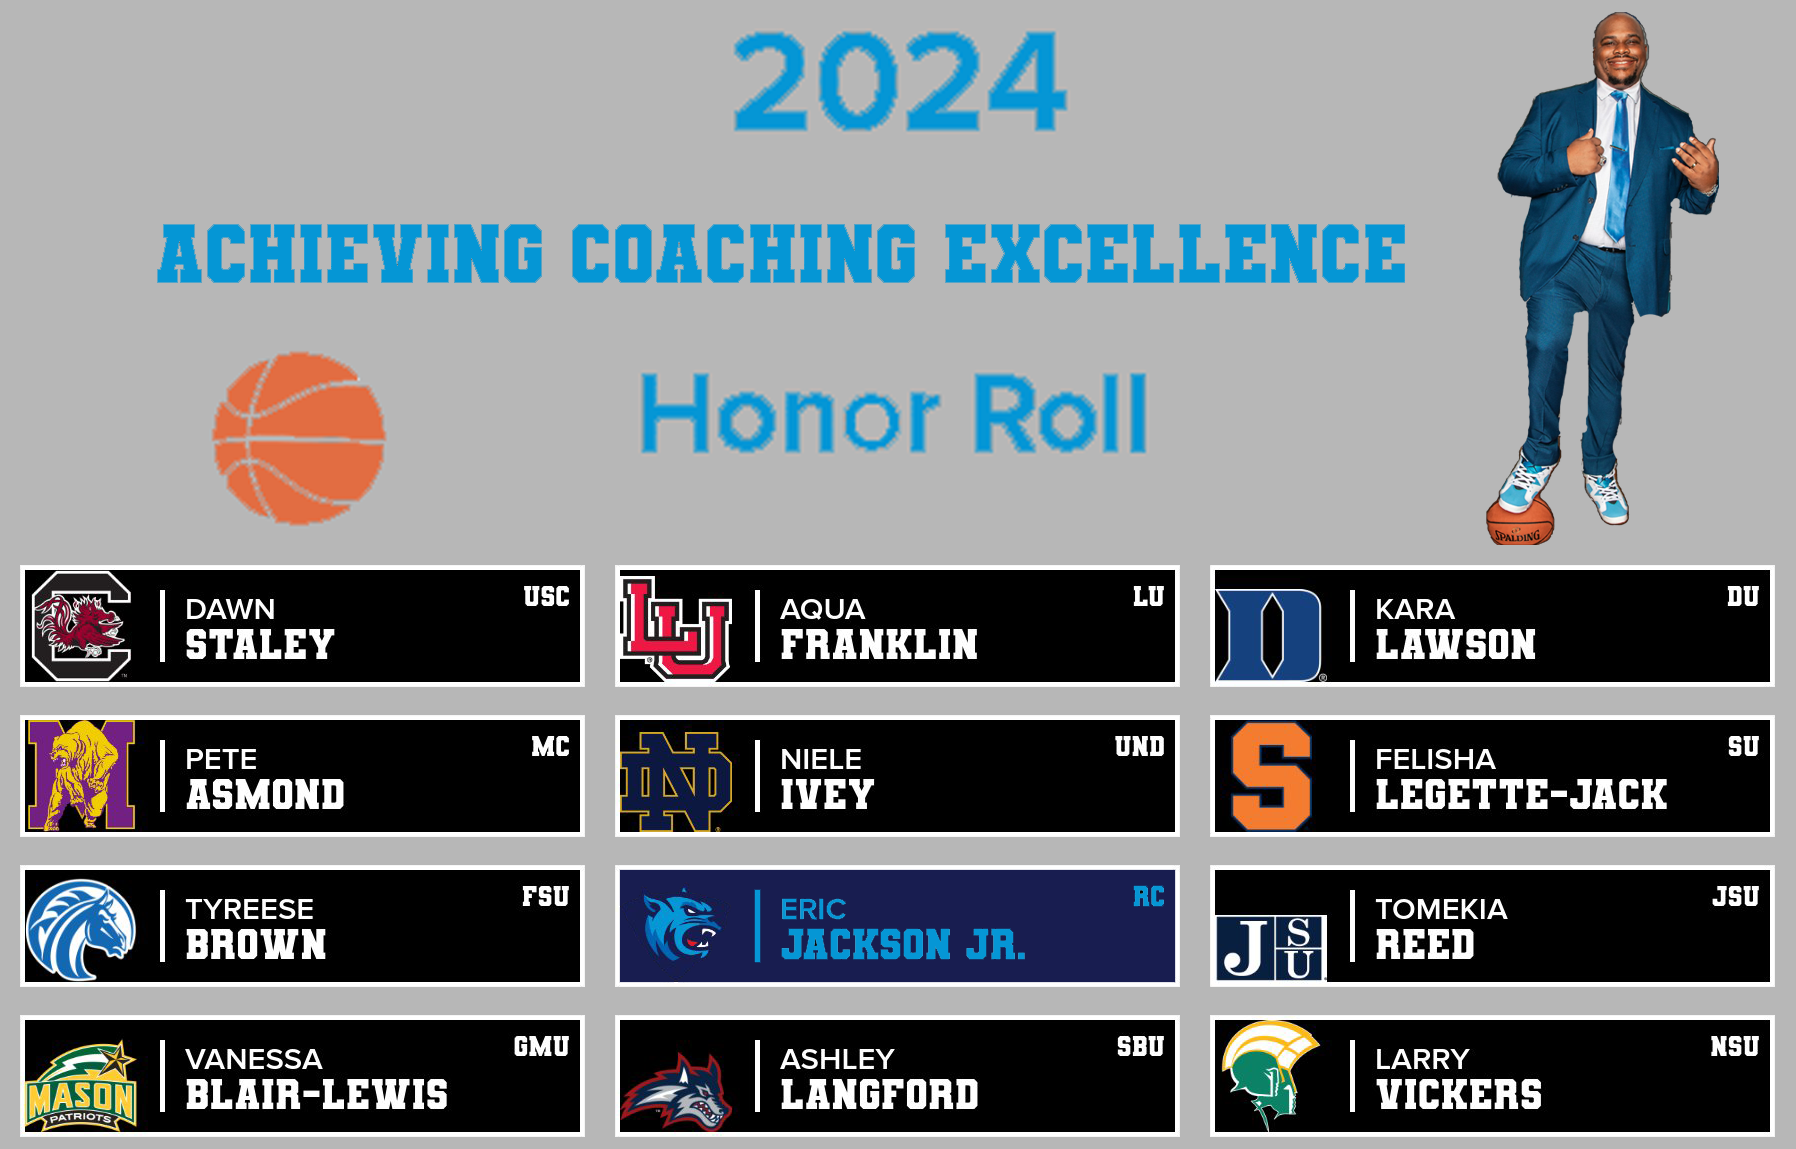 Coach Jackson Lands On Achieving Coaching Excellence Honor Roll For Second Straight Season